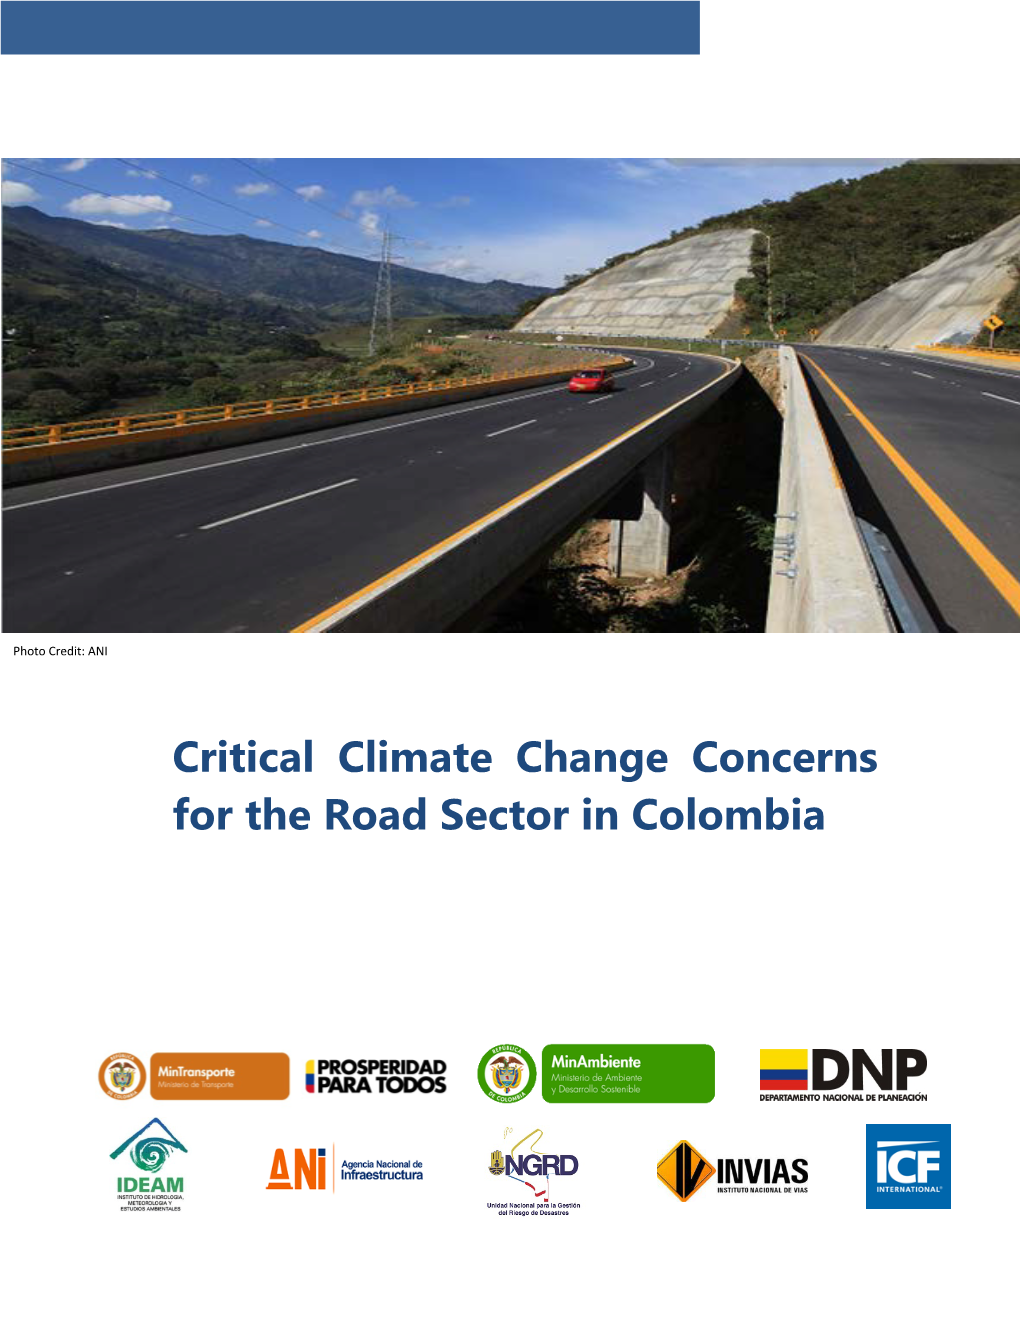 Critical Climate Change Concerns for the Road Sector in Colombia